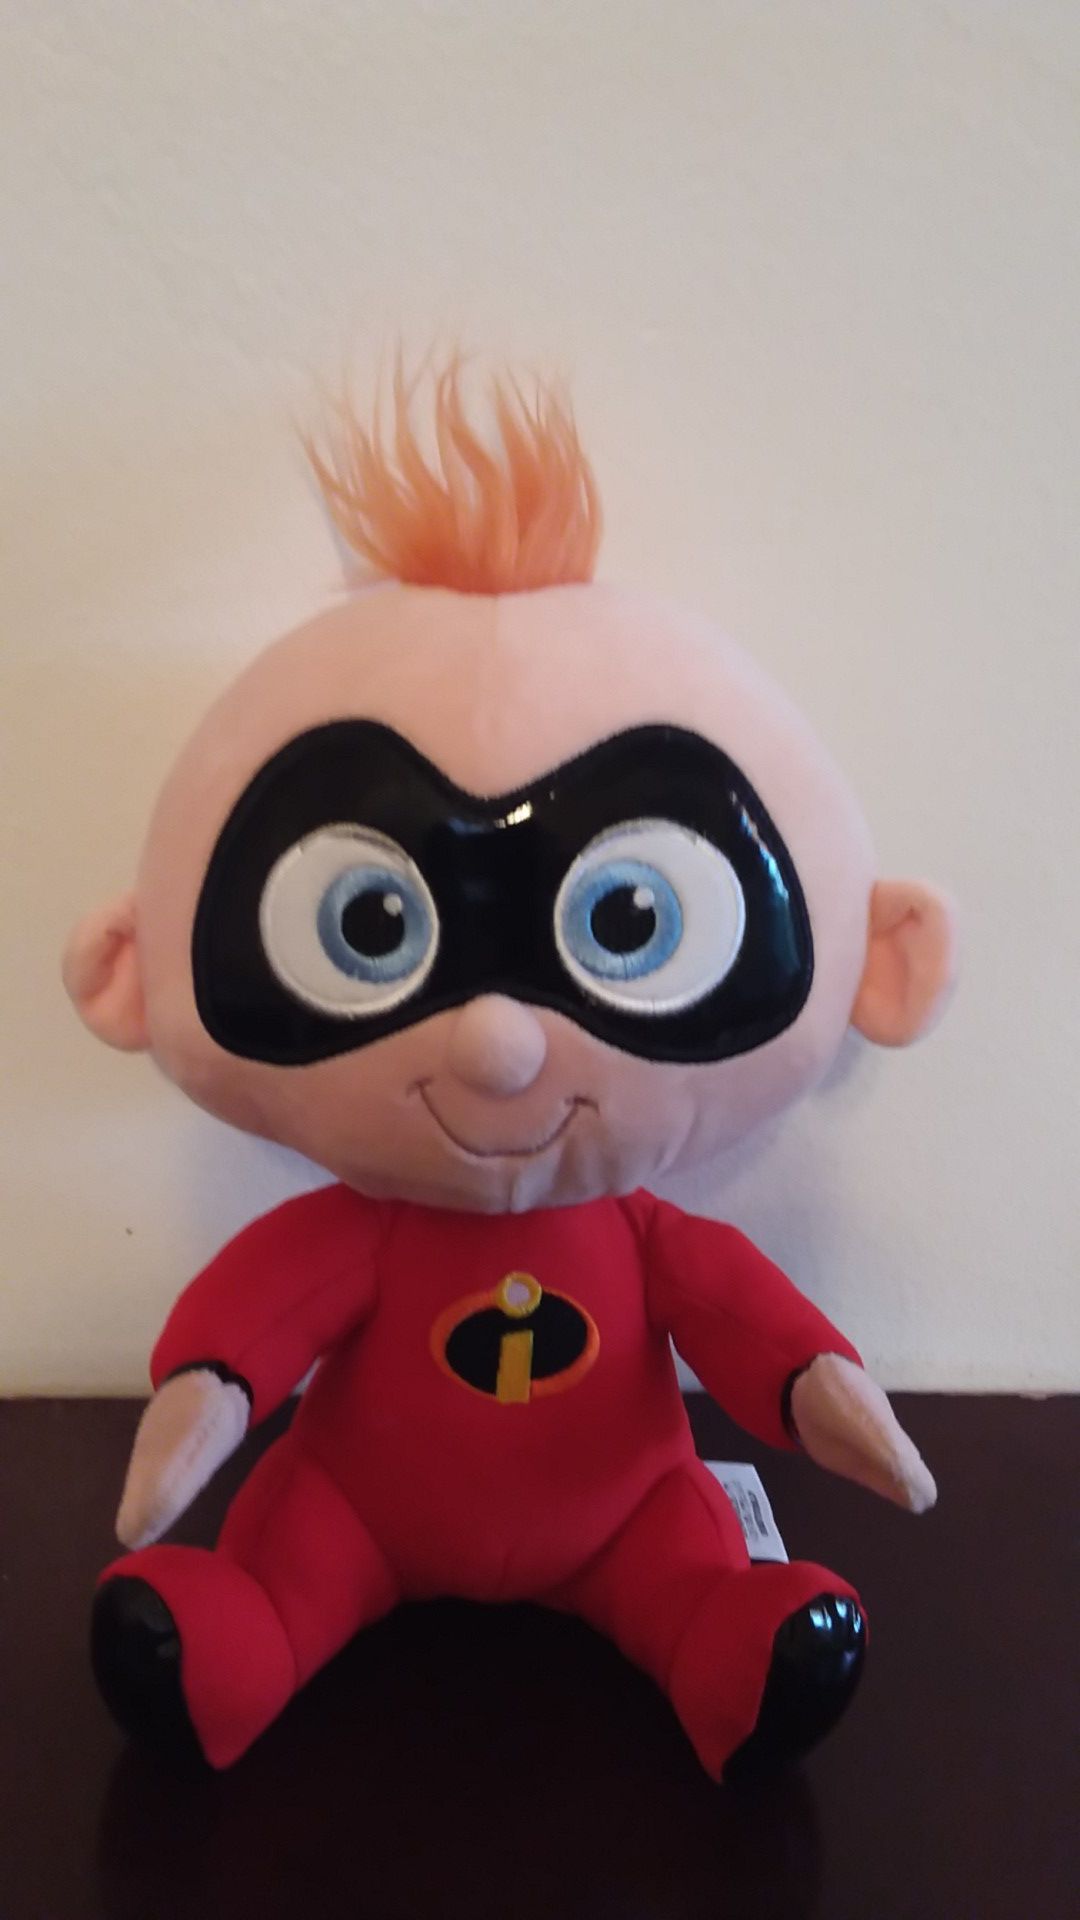 The incredibles plush